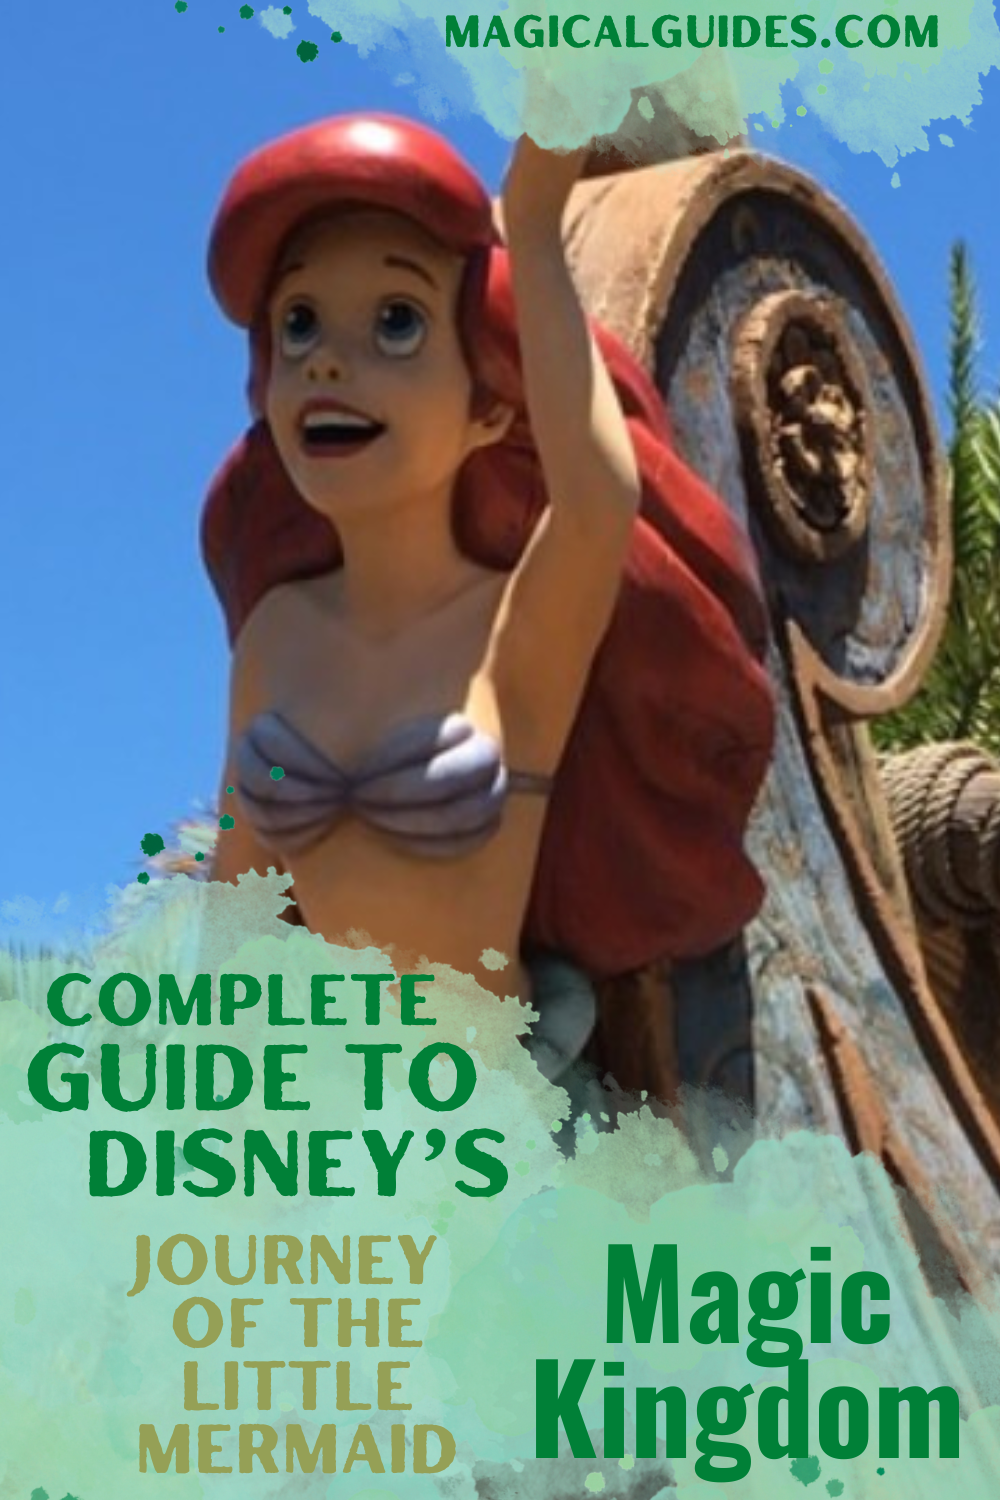 Fantasyland in Magic Kingdom has my favorite ride, Under the Sea: Journey of the Little Mermaid. Everything you need to know about this ride featuring Ariel.